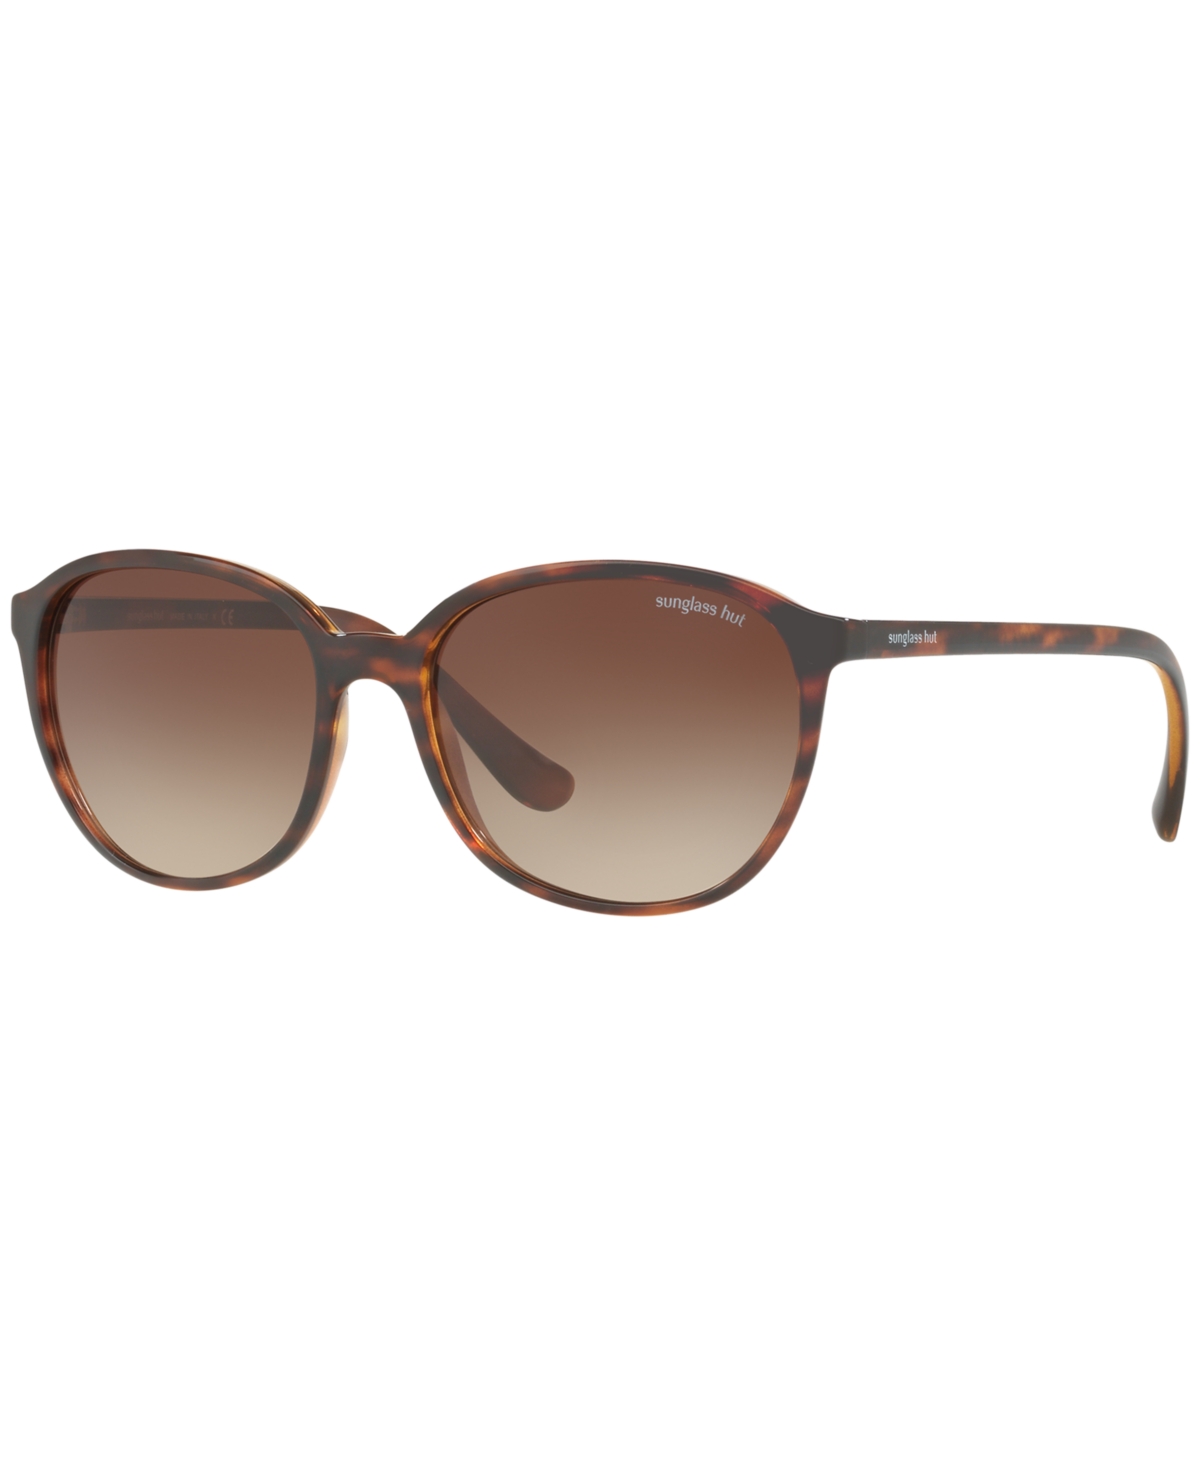 Sunglass Hut Collection Sunglasses, Hu2003 55 In Brown,brown Gradient